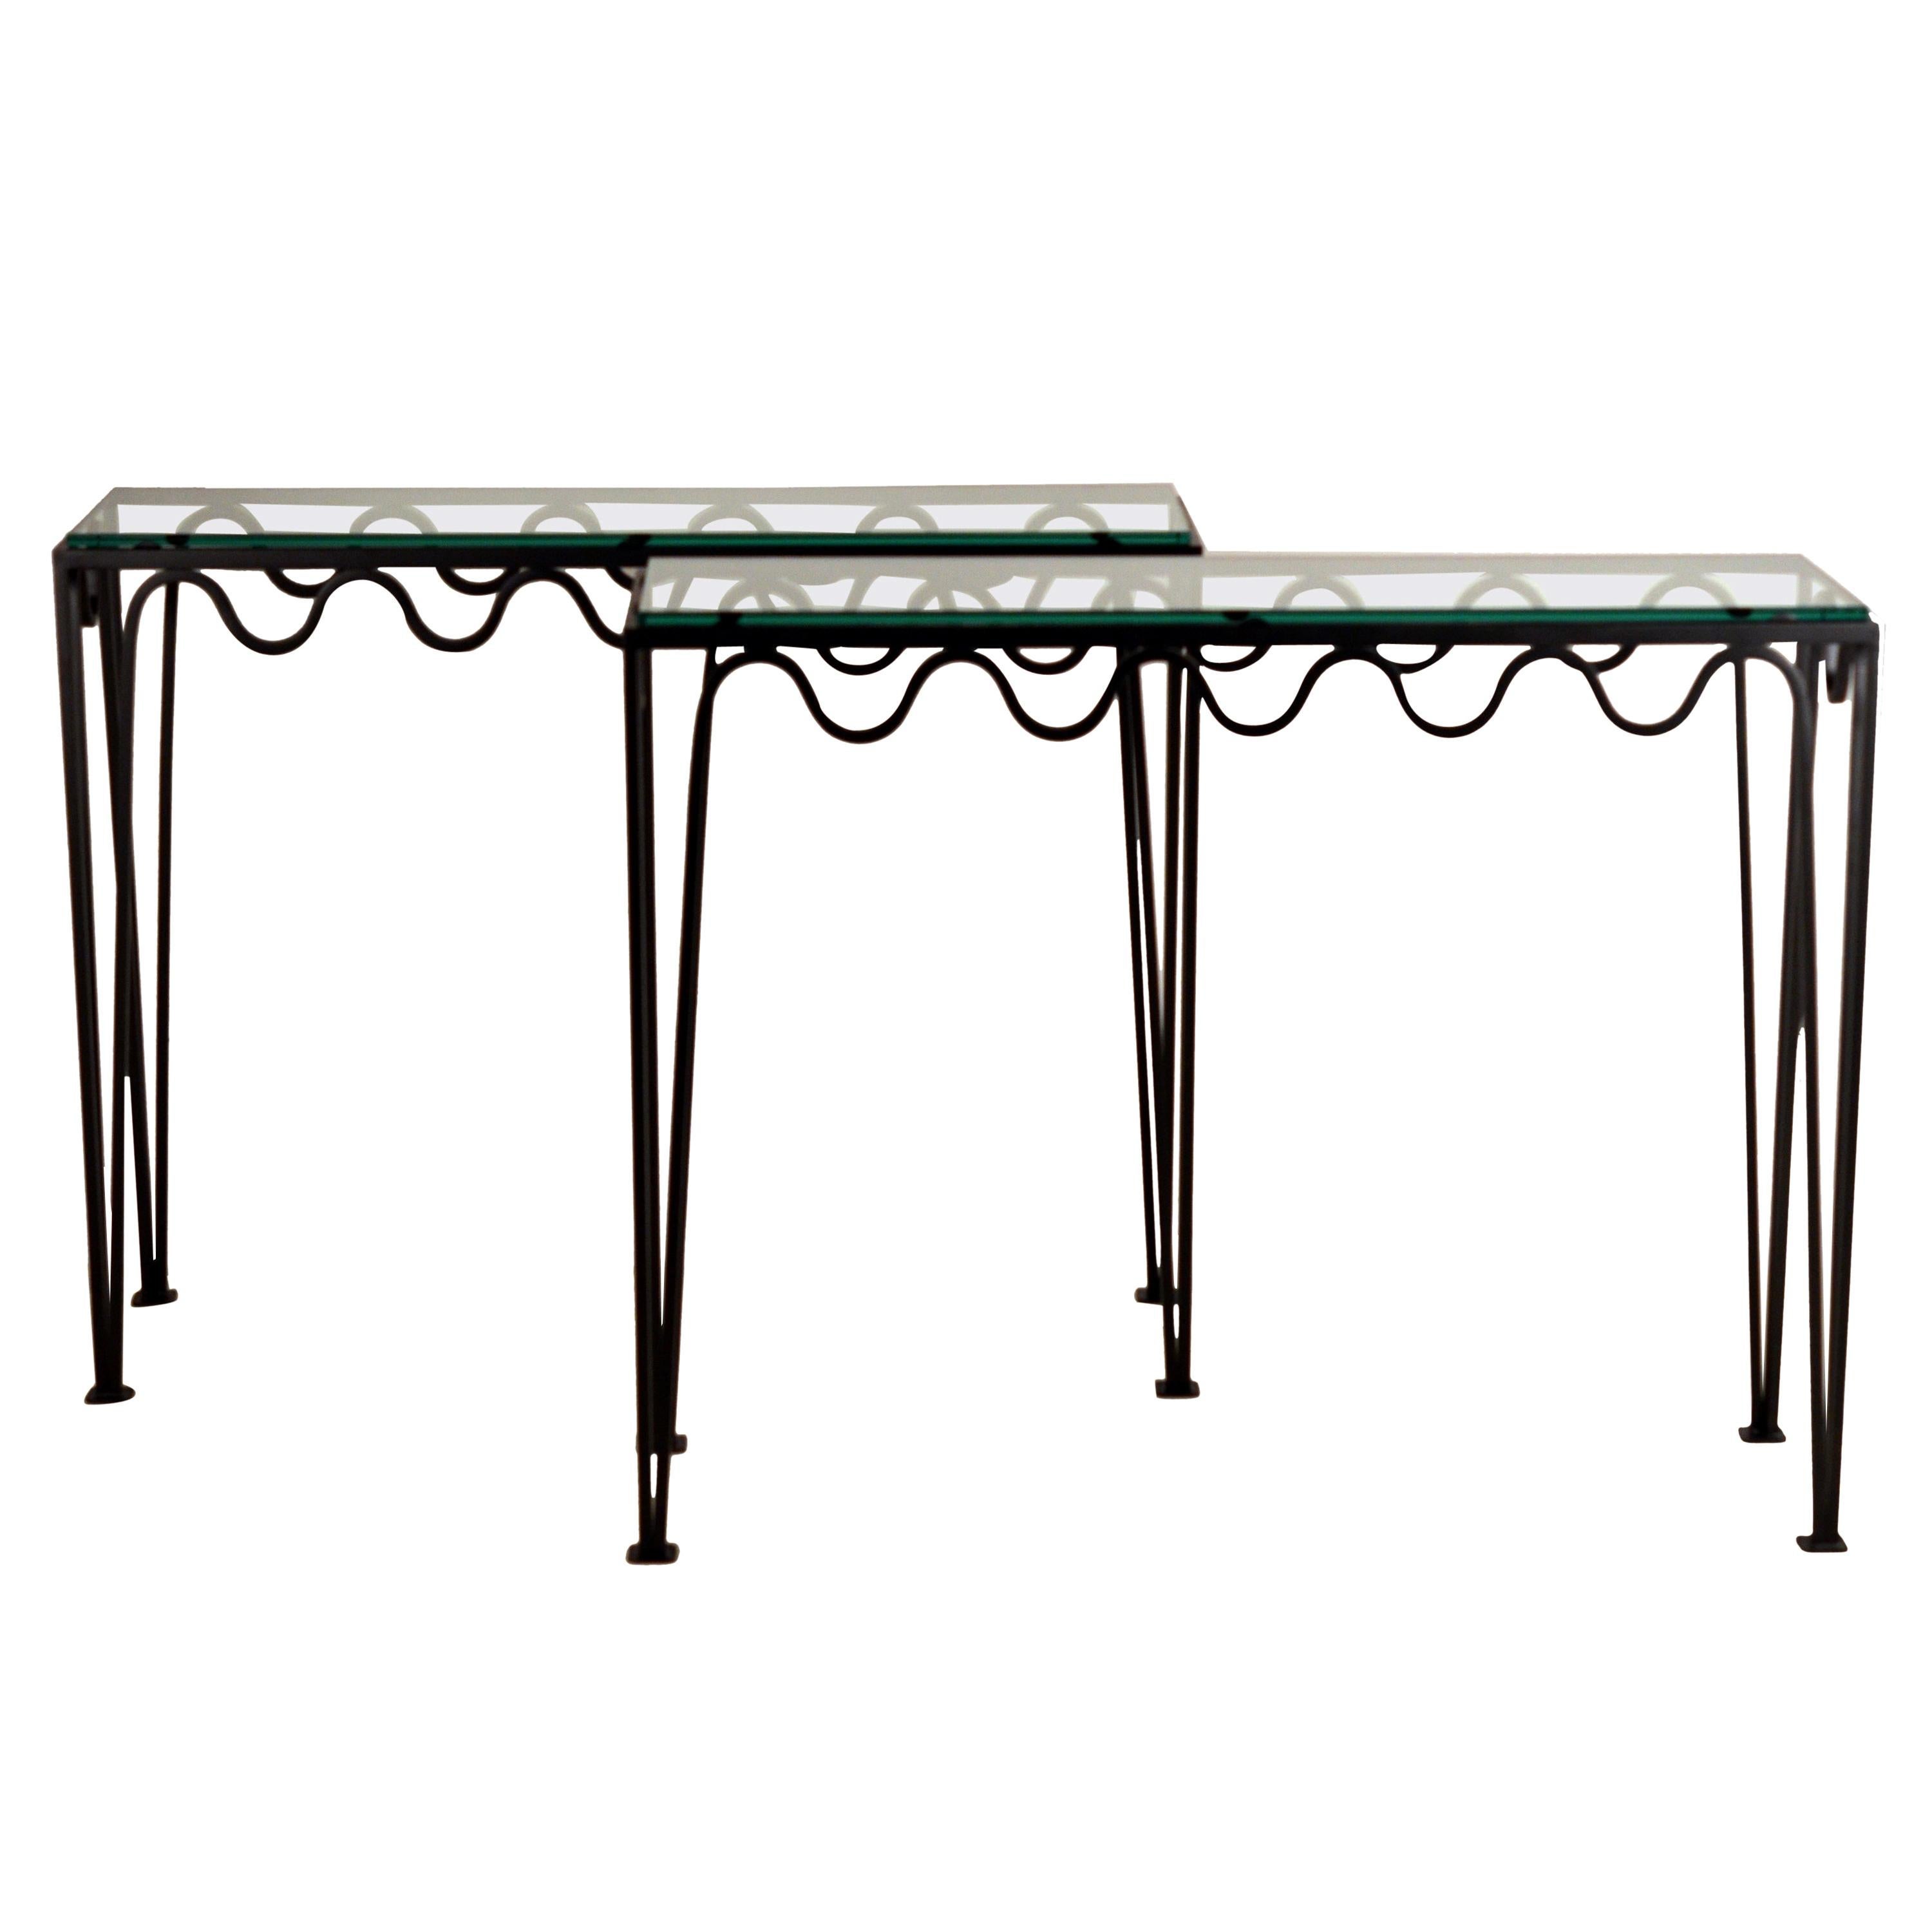 Pair of Undulating 'Méandre' Wrought Iron and Glass Consoles by Design Frères For Sale